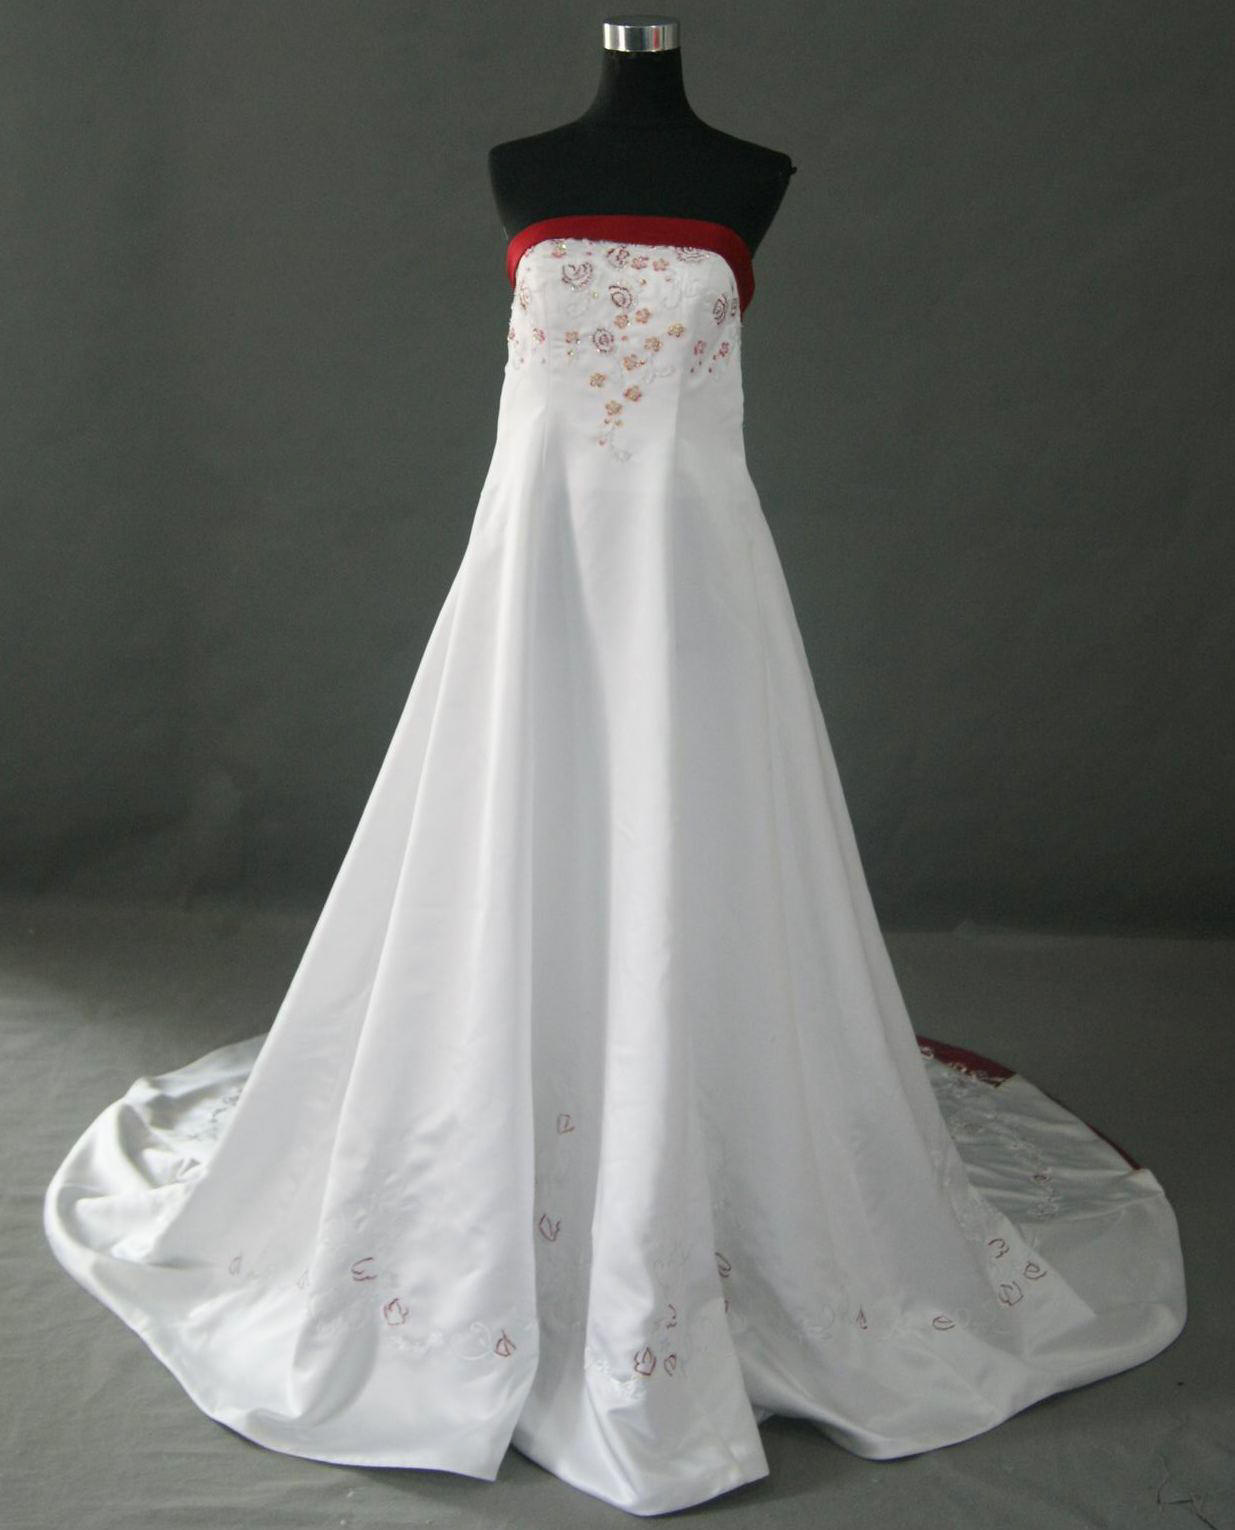 Wedding dress with red embroidered flowers